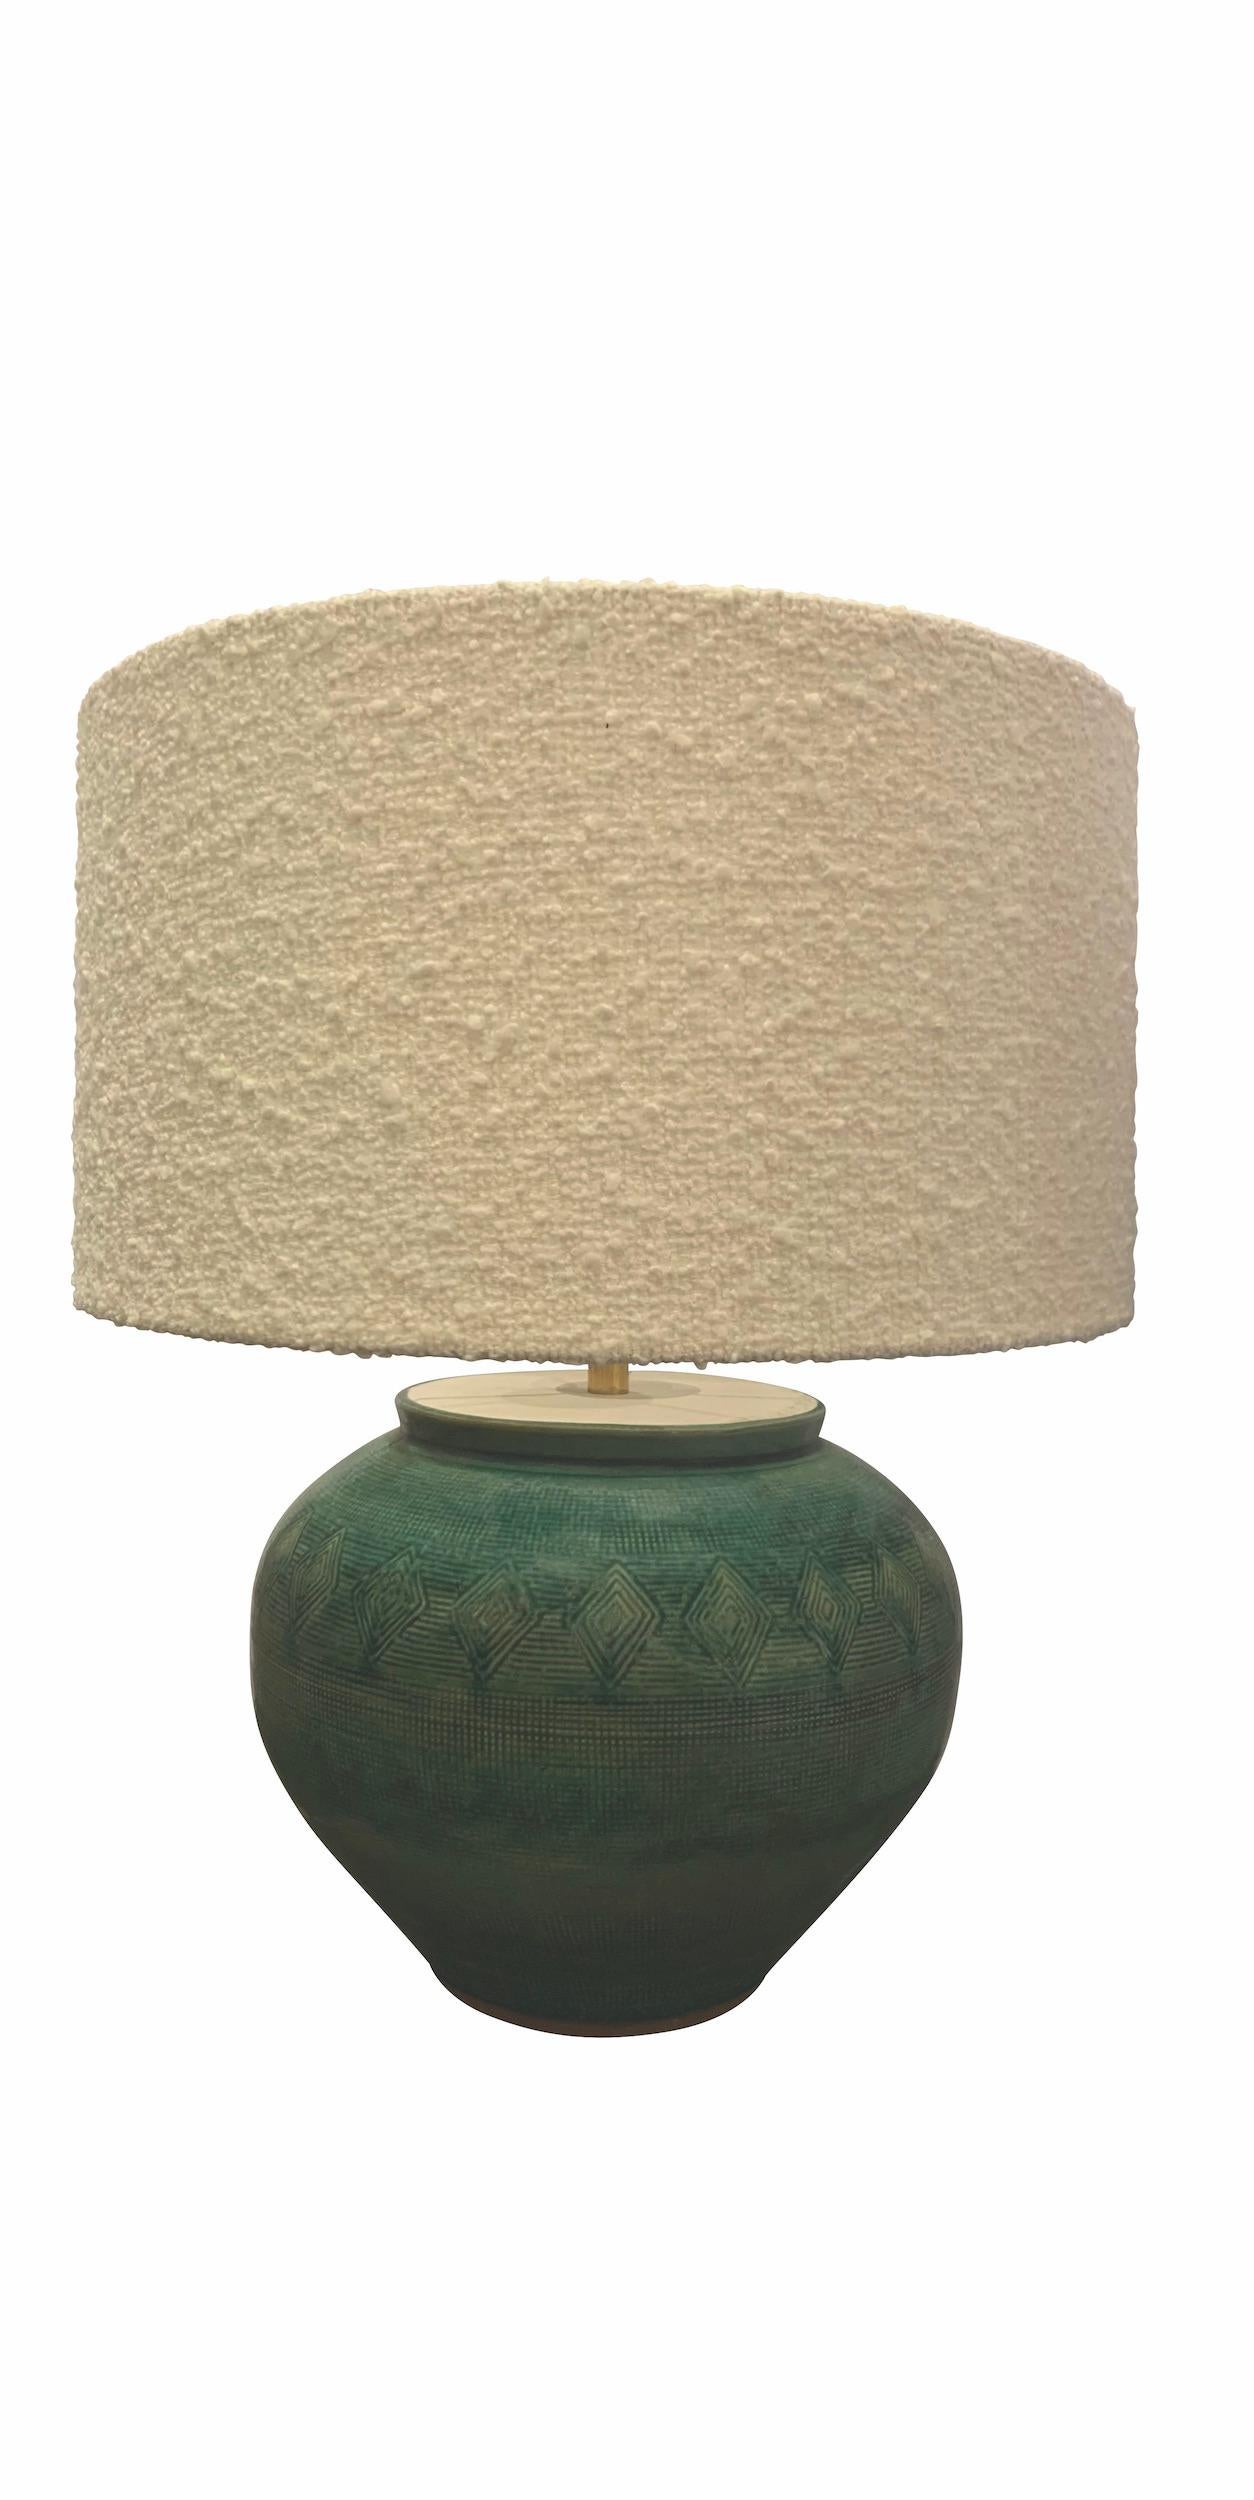 Contemporary Chinese pair of round shaped lamps with a crackled mottled turquoise glaze.
Boucle shades included.
Base measures 12